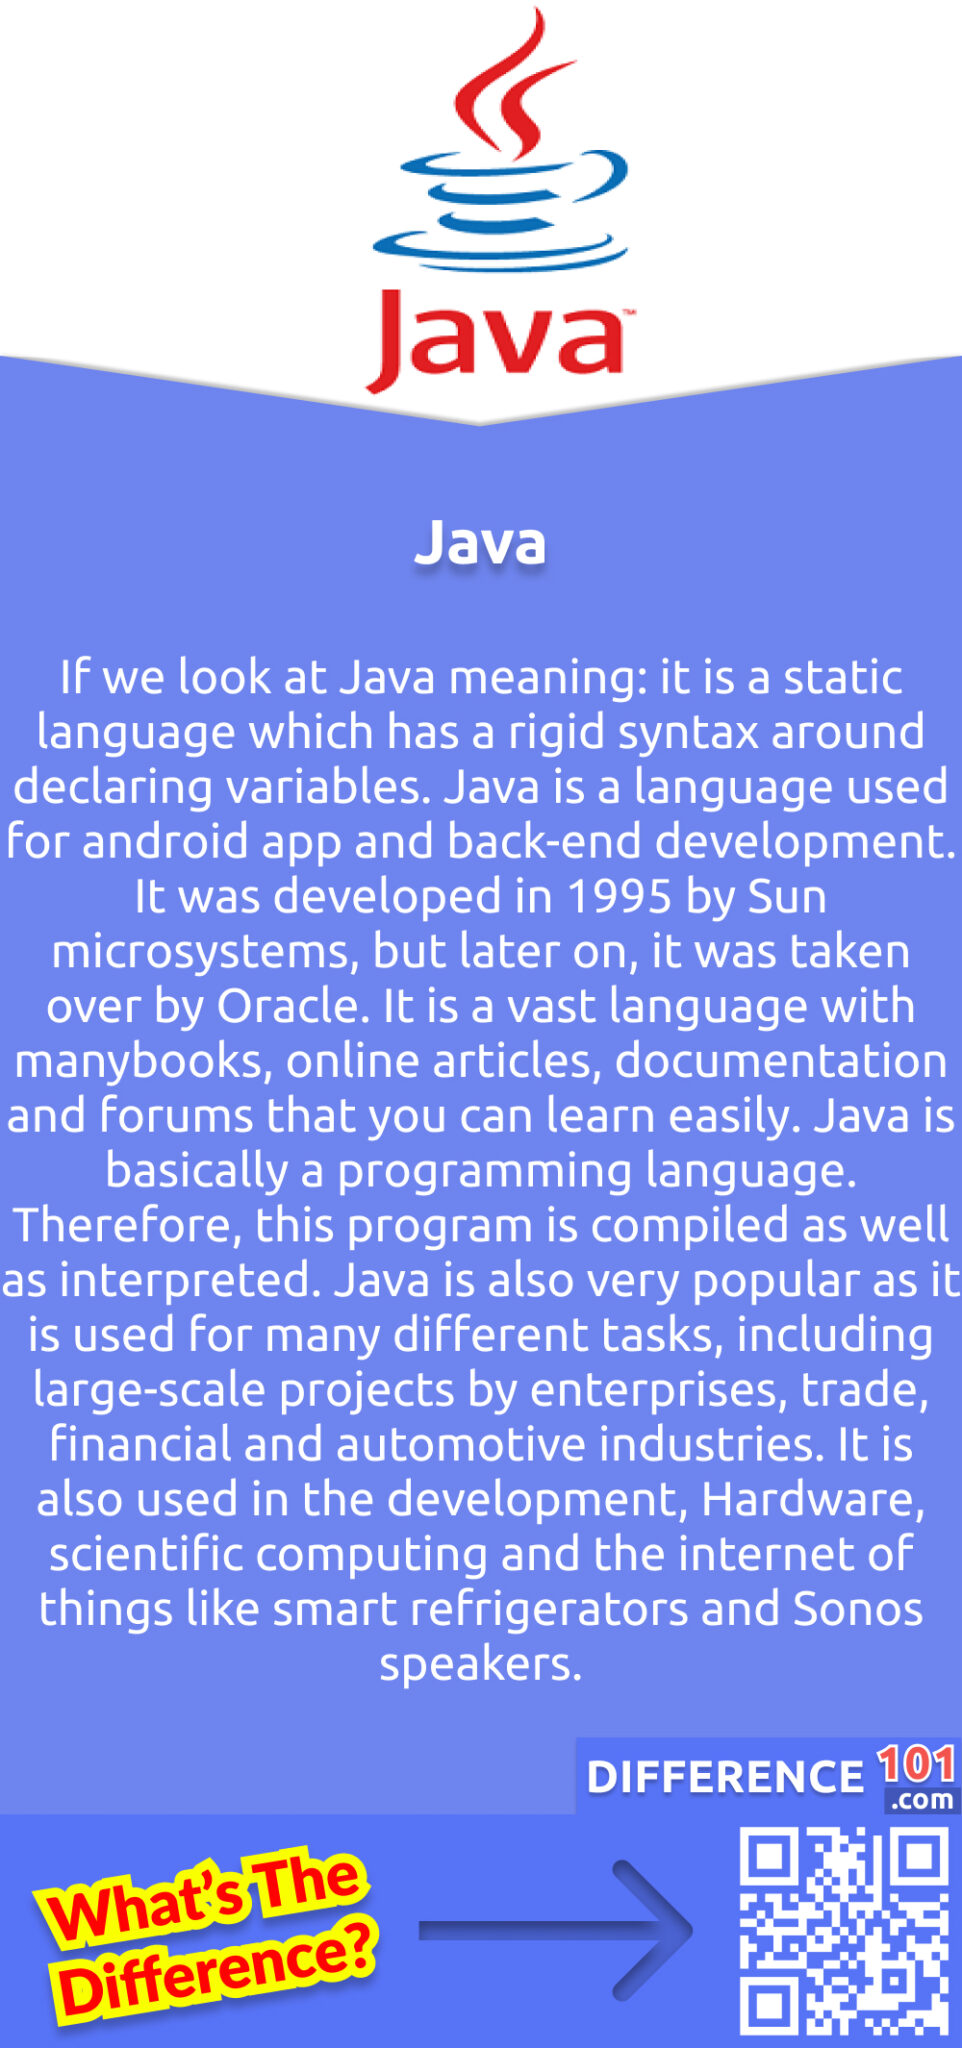 What Is Java? If we look at Java meaning: it is a static language which has a rigid syntax around declaring variables. Java is a language used for android app and back-end development. It was developed in 1995 by Sun microsystems, but later on, it was taken over by Oracle. It is a vast language with manybooks, online articles, documentation and forums that you can learn easily. Java is basically a programming language. Therefore, this program is compiled as well as interpreted. Java is also very popular as it is used for many different tasks, including large-scale projects by enterprises, trade, financial and automotive industries. It is also used in the development, Hardware, scientific computing and the internet of things like smart refrigerators and Sonos speakers.